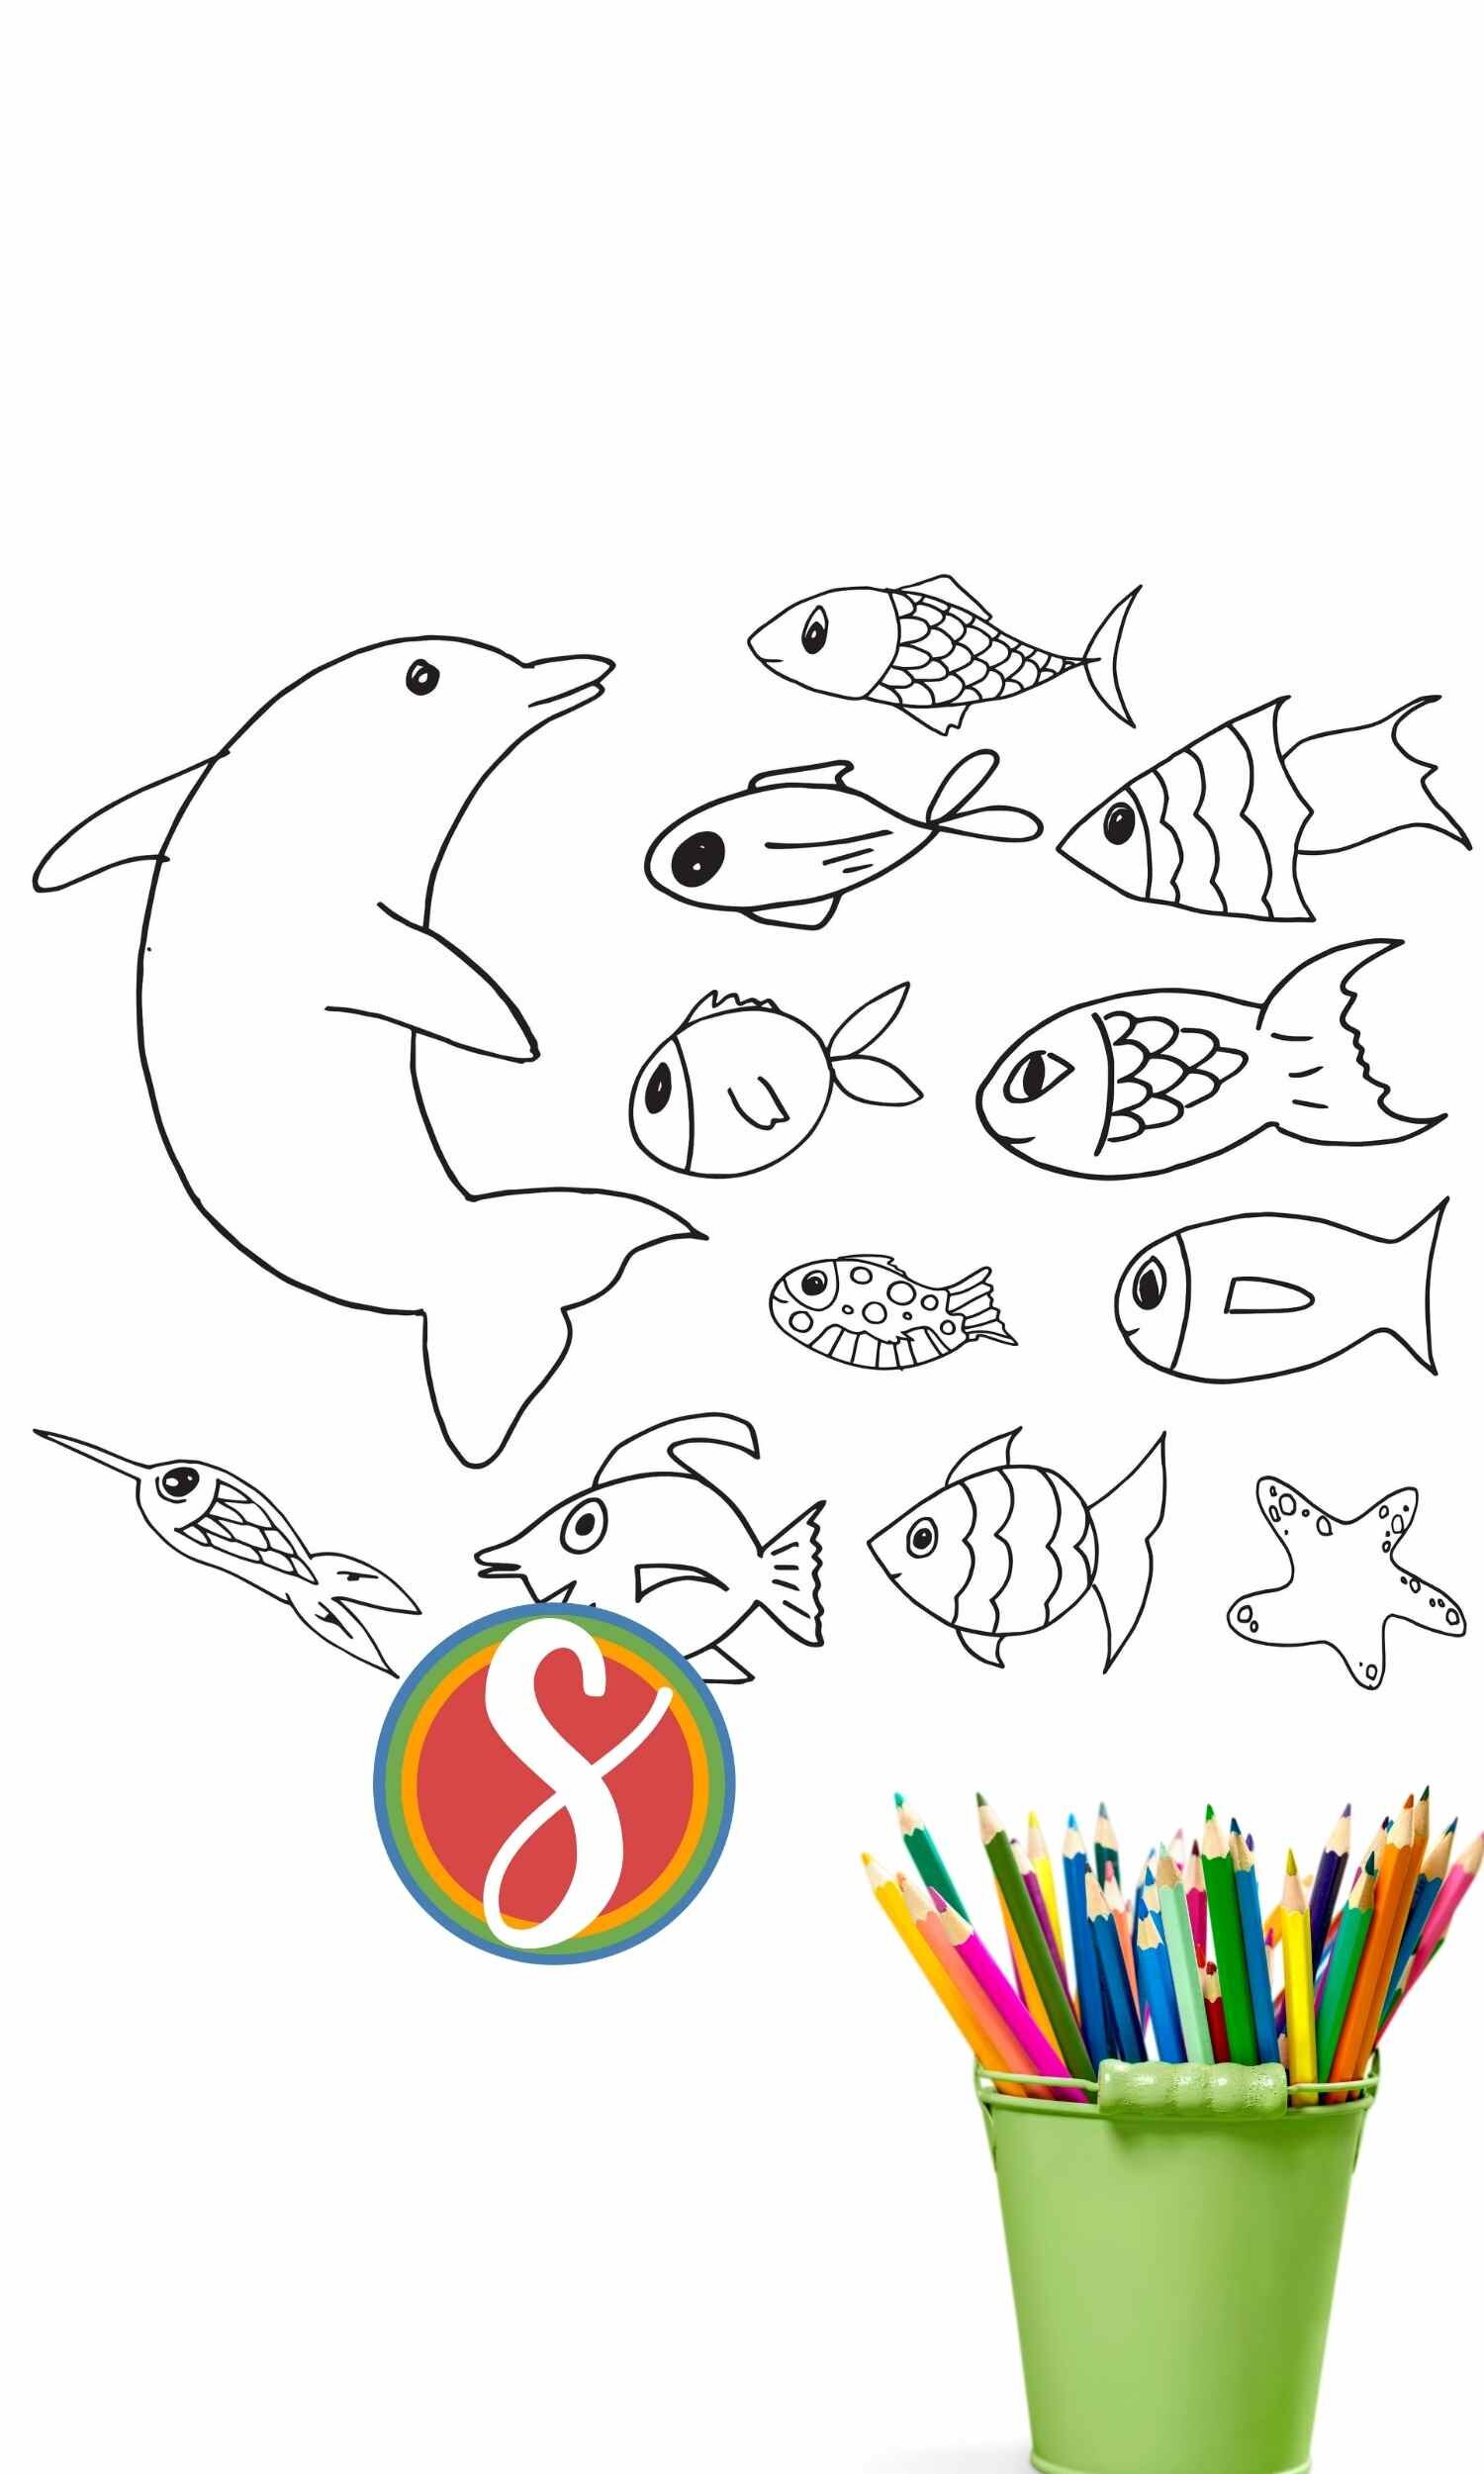 Free dolphin coloring page with fish from Stevie Doodles - 11 free dolphin sheets to print and color